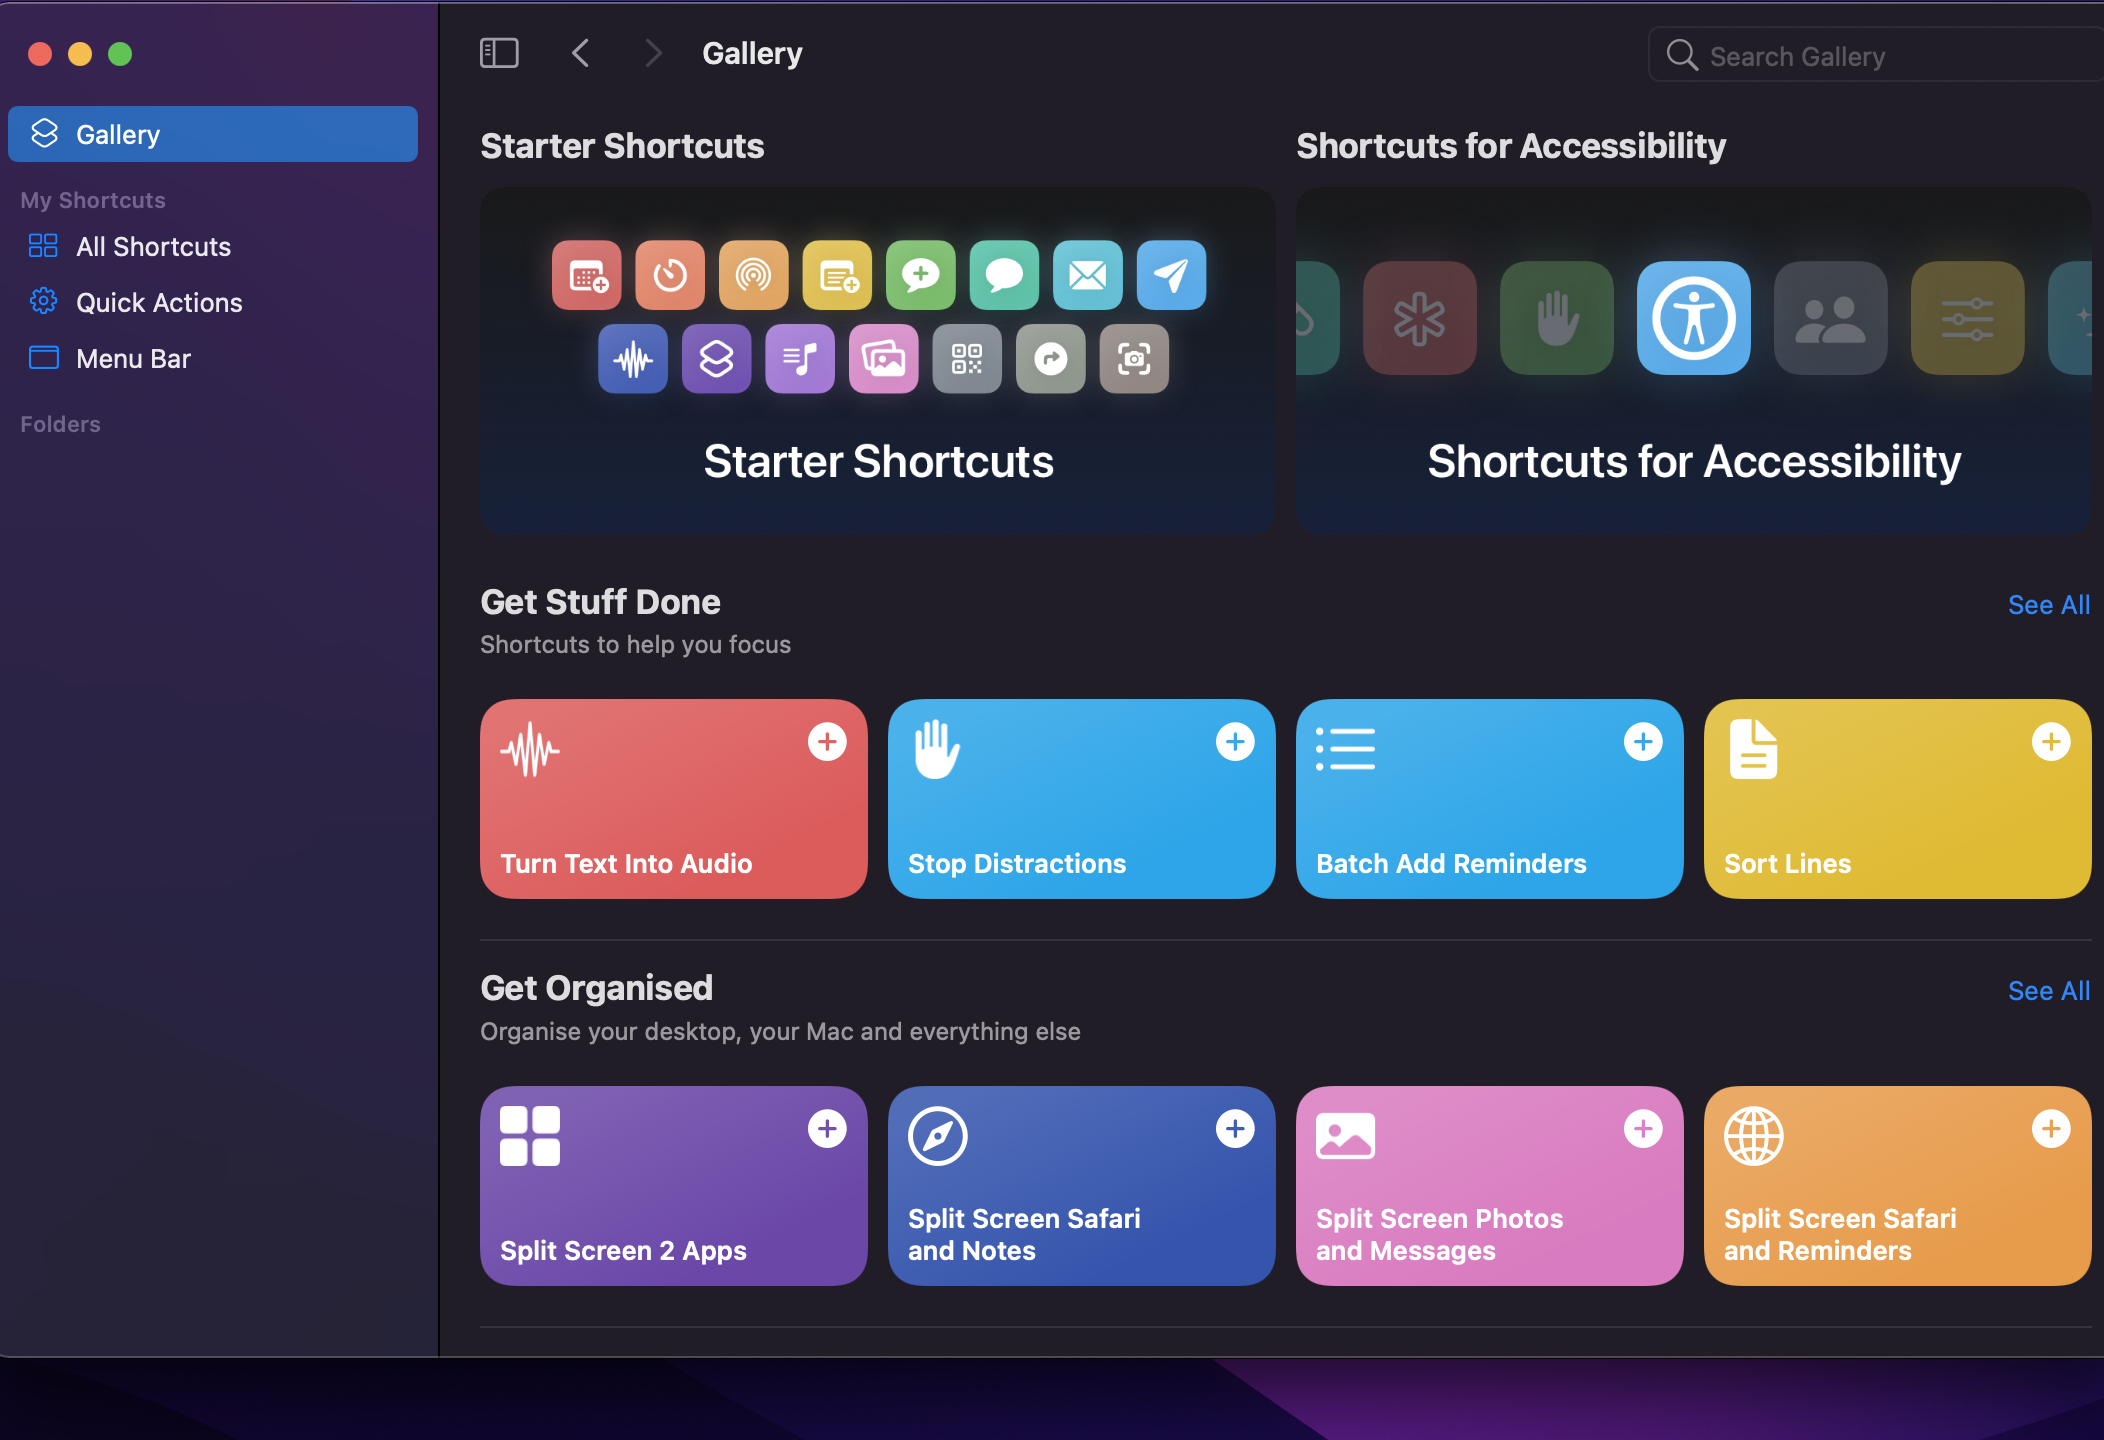 Shortcuts is now a universal app across iOS and Mac